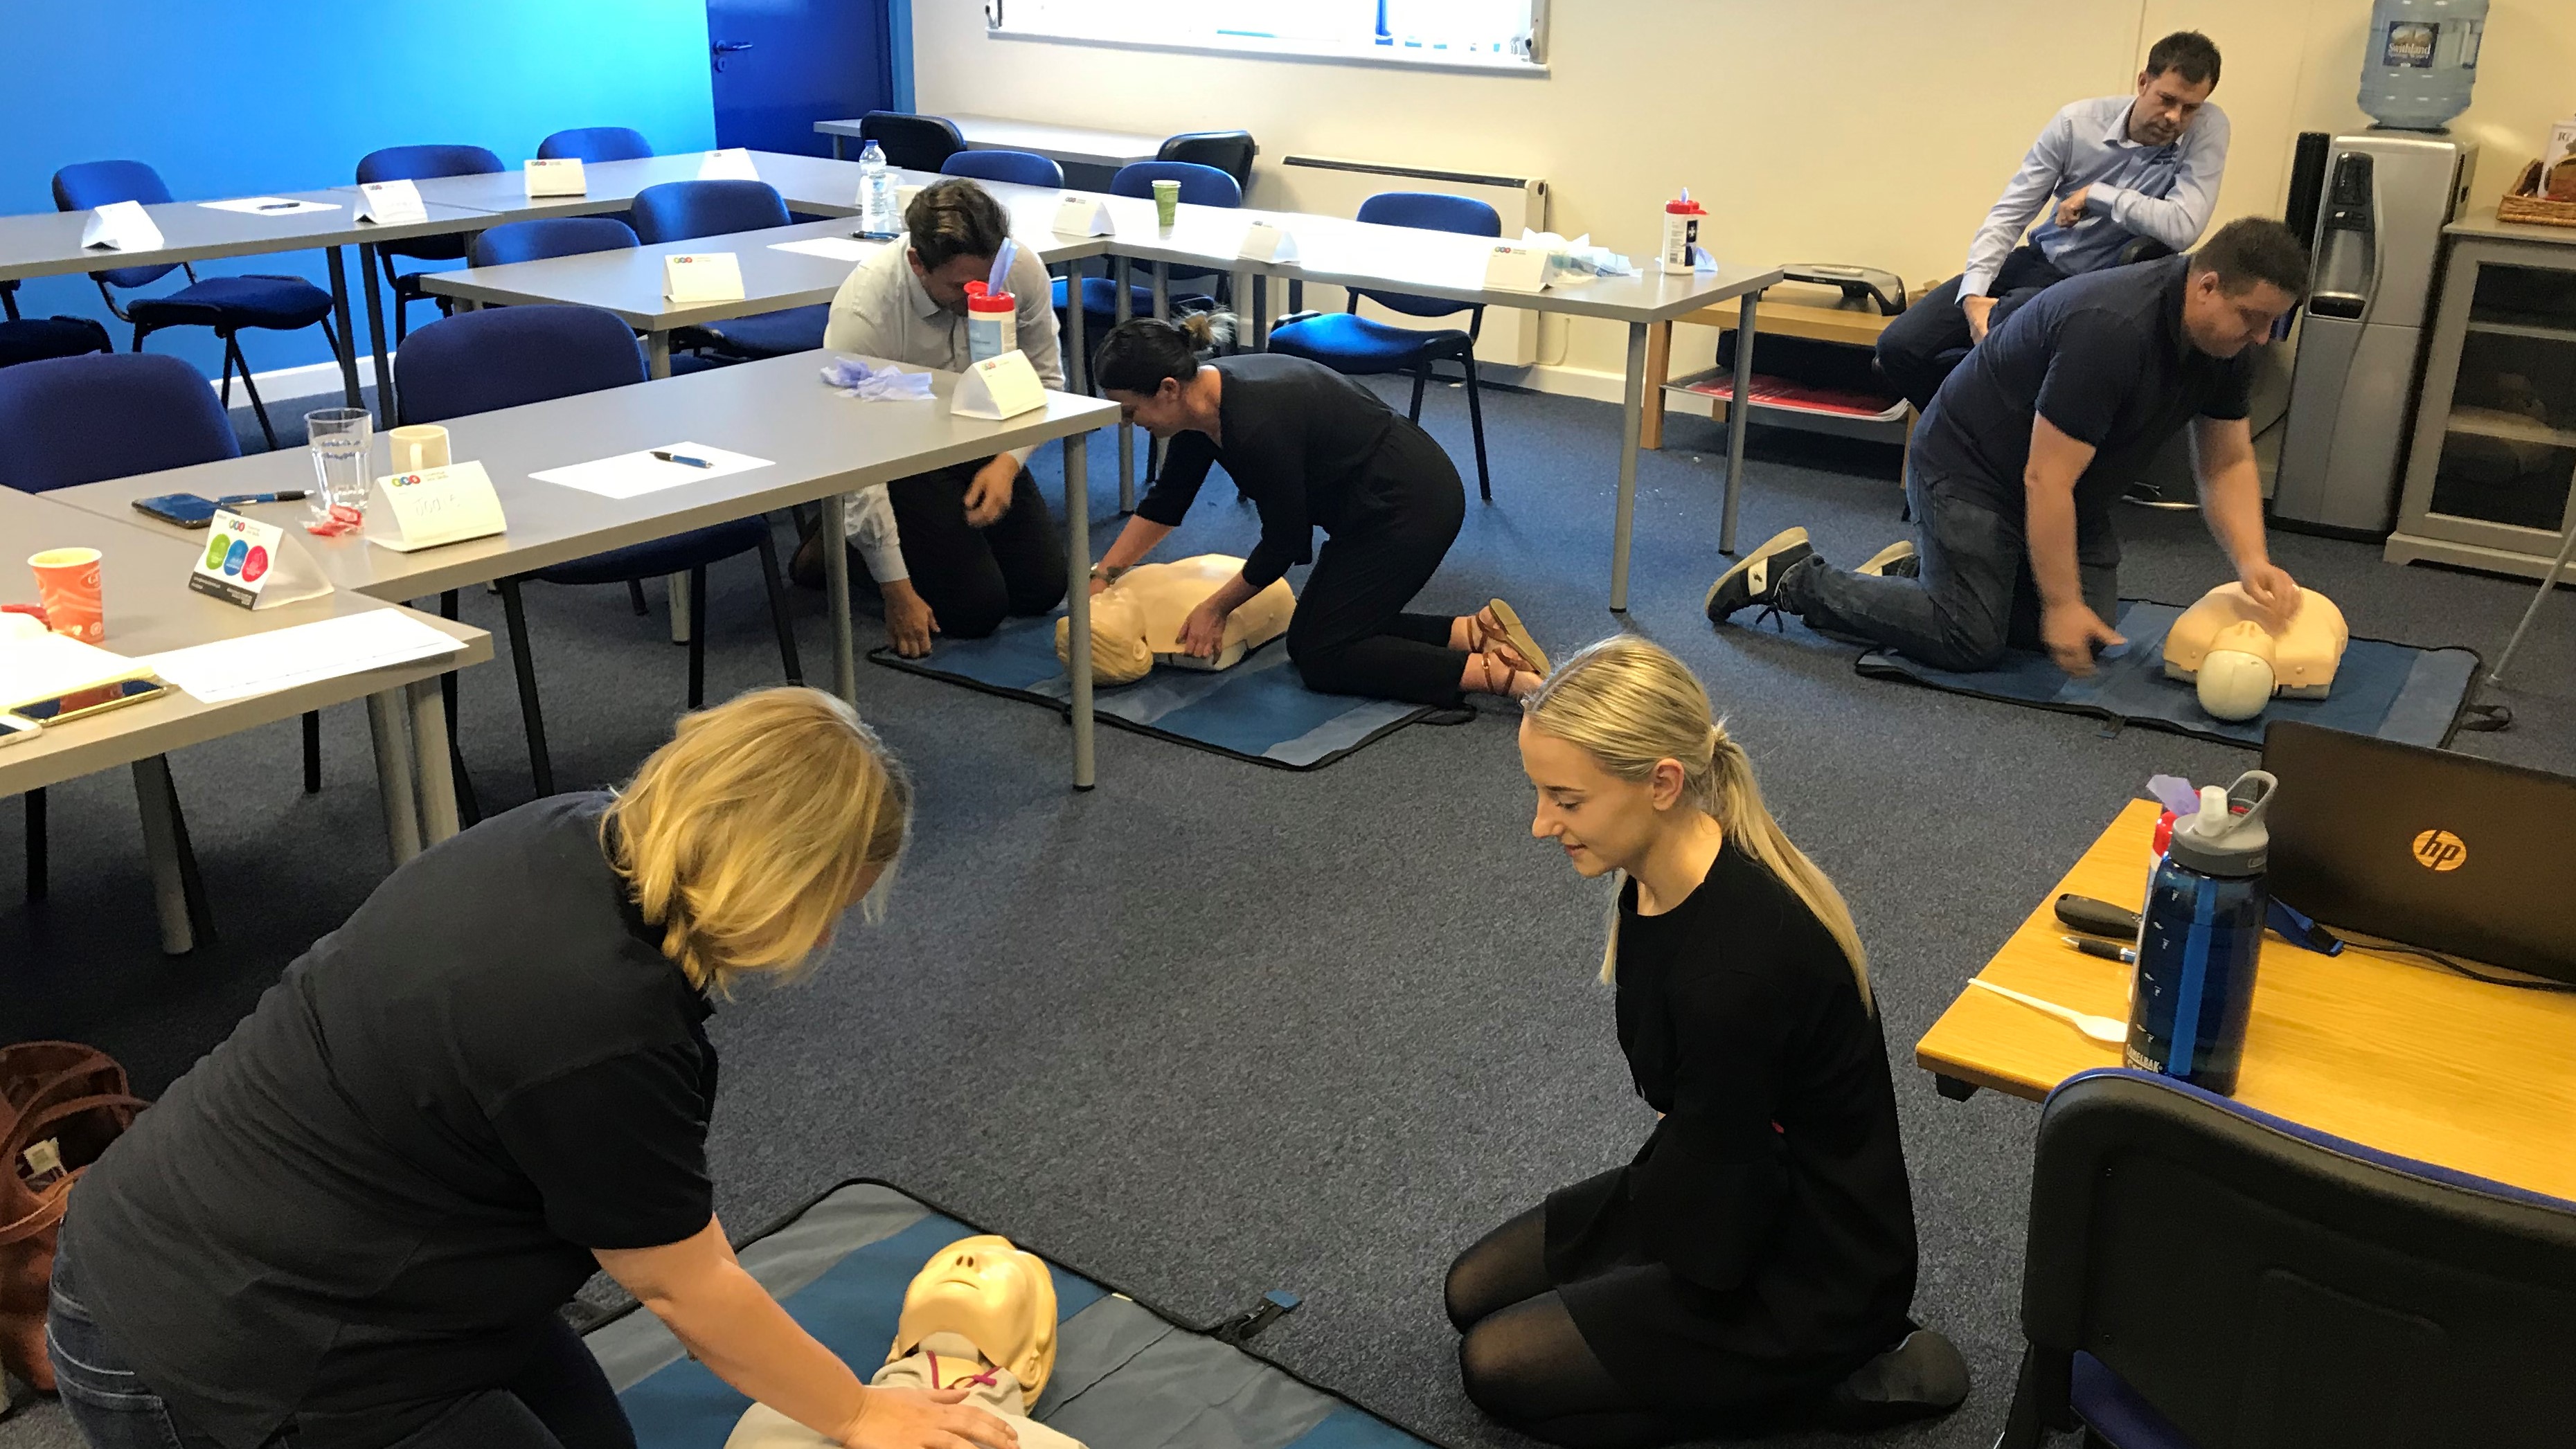 image shows First Aid Training